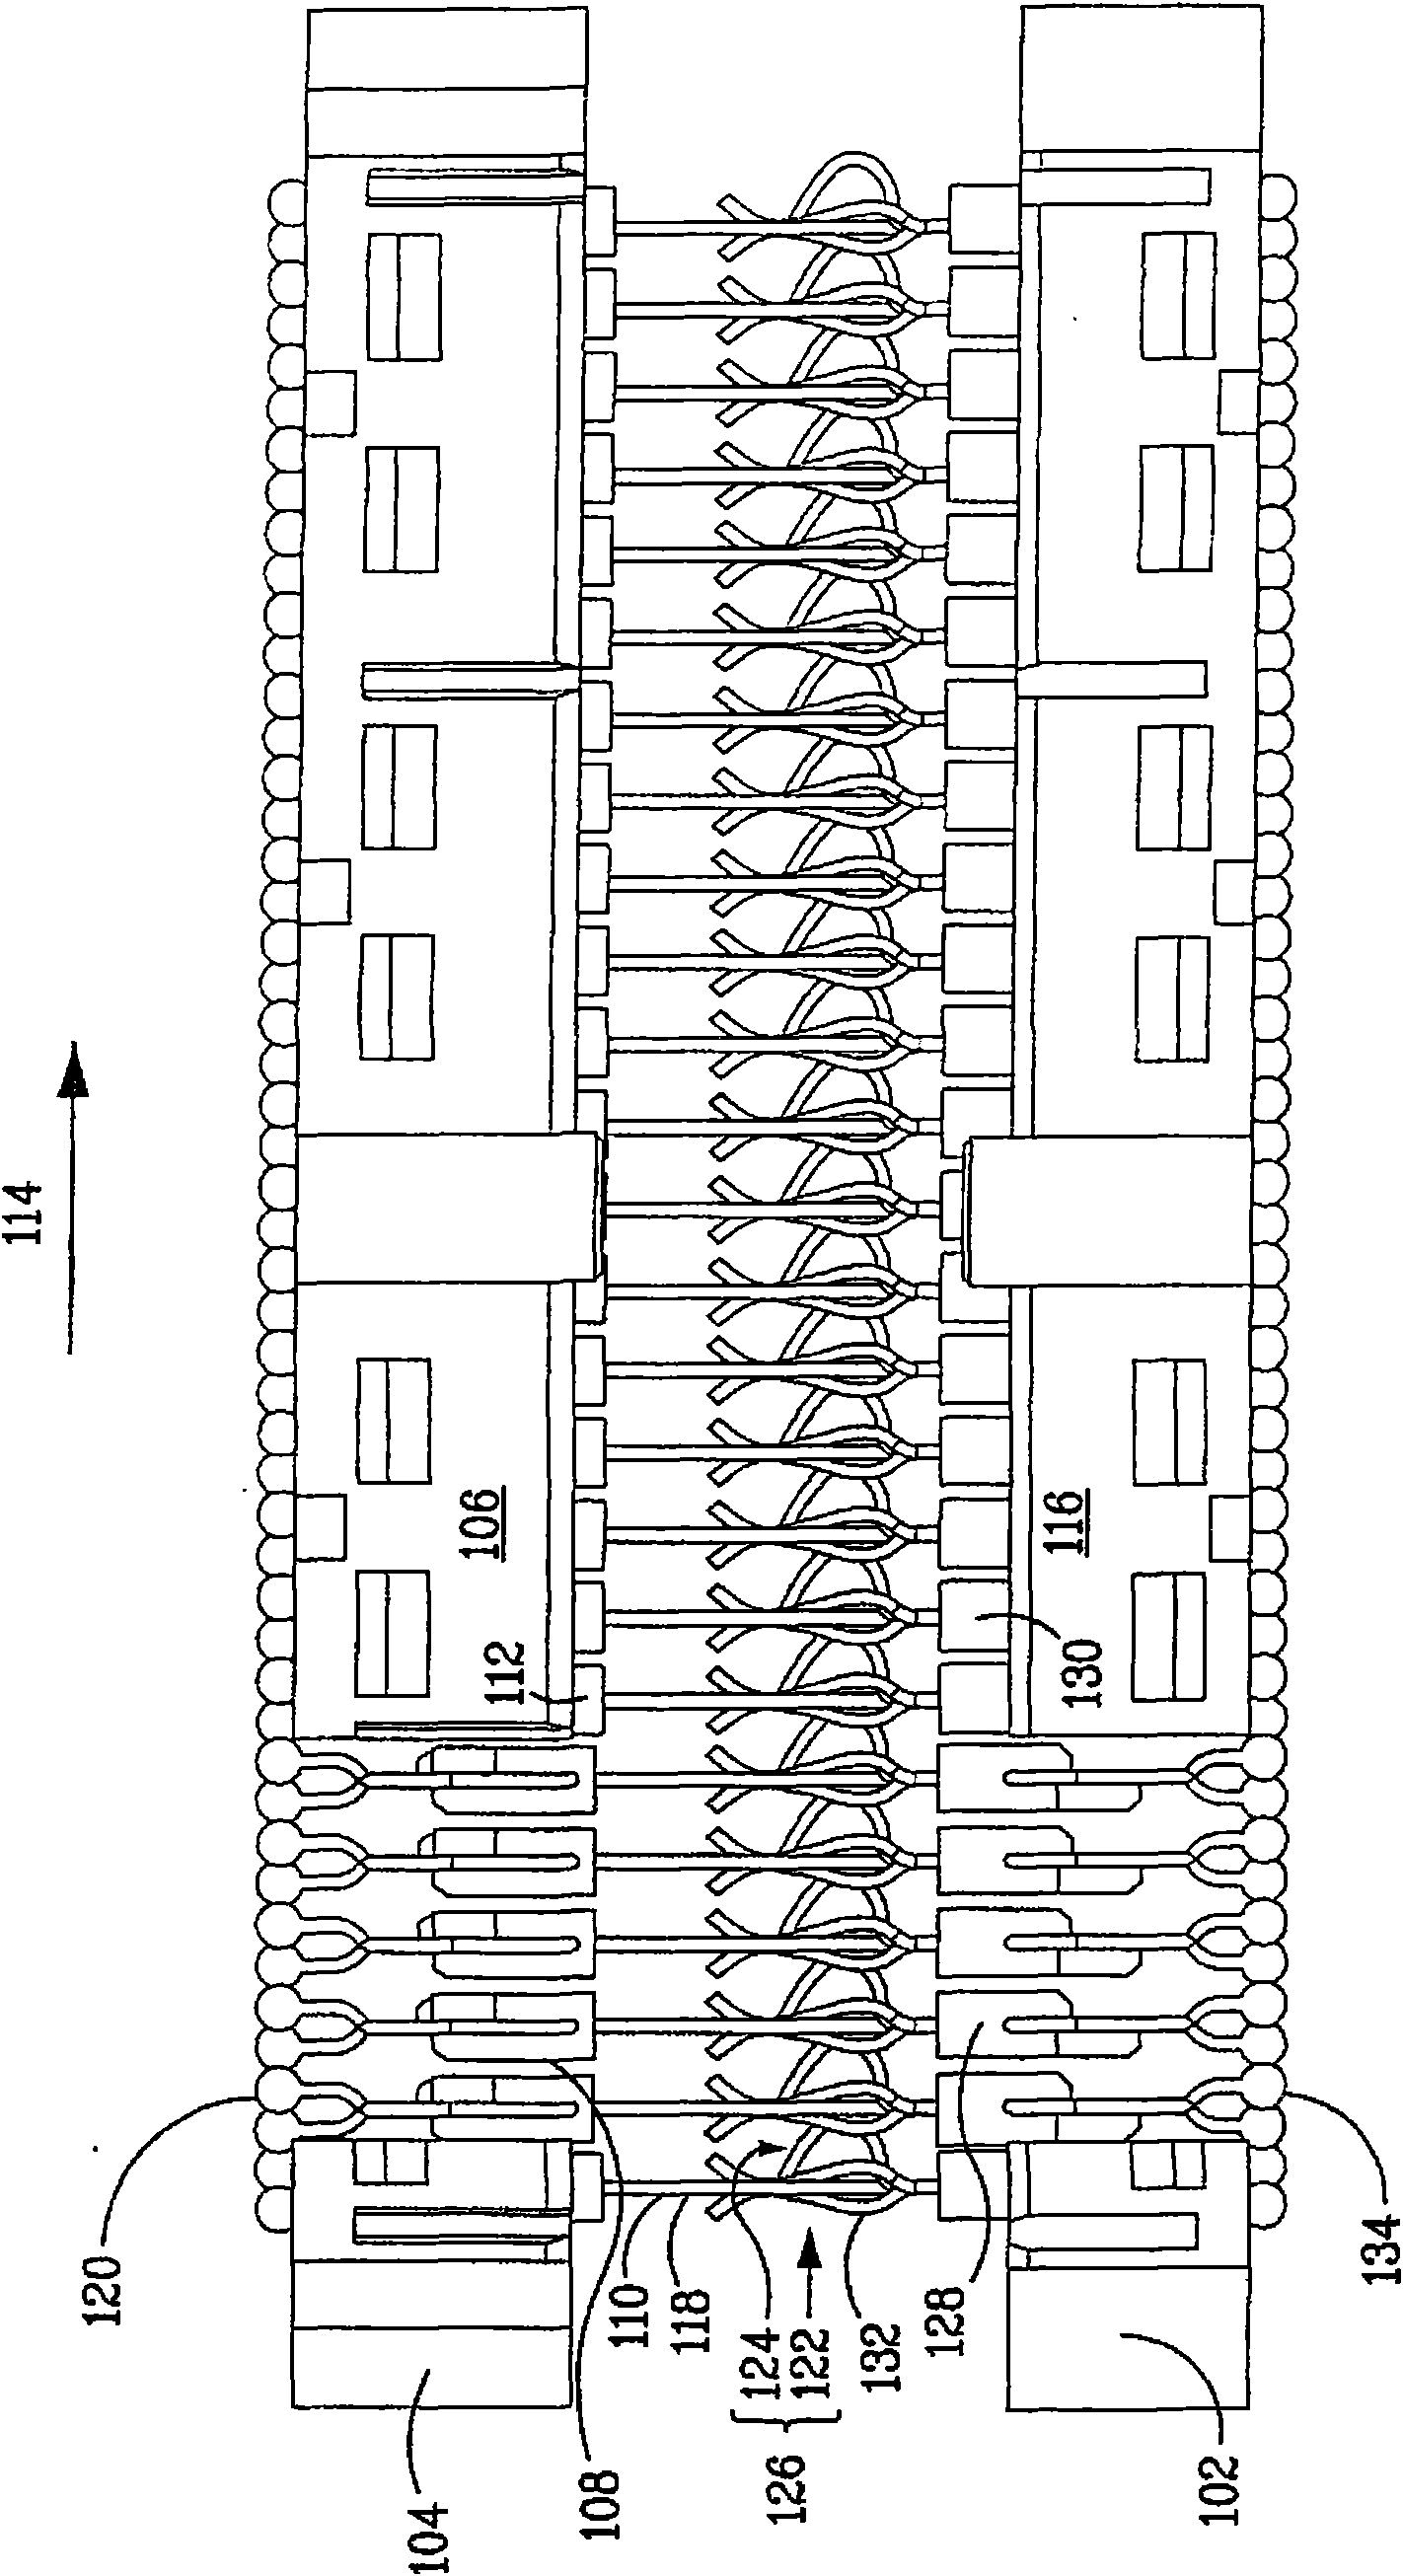 Electrical connector system having a continuous ground at the mating interface thereof